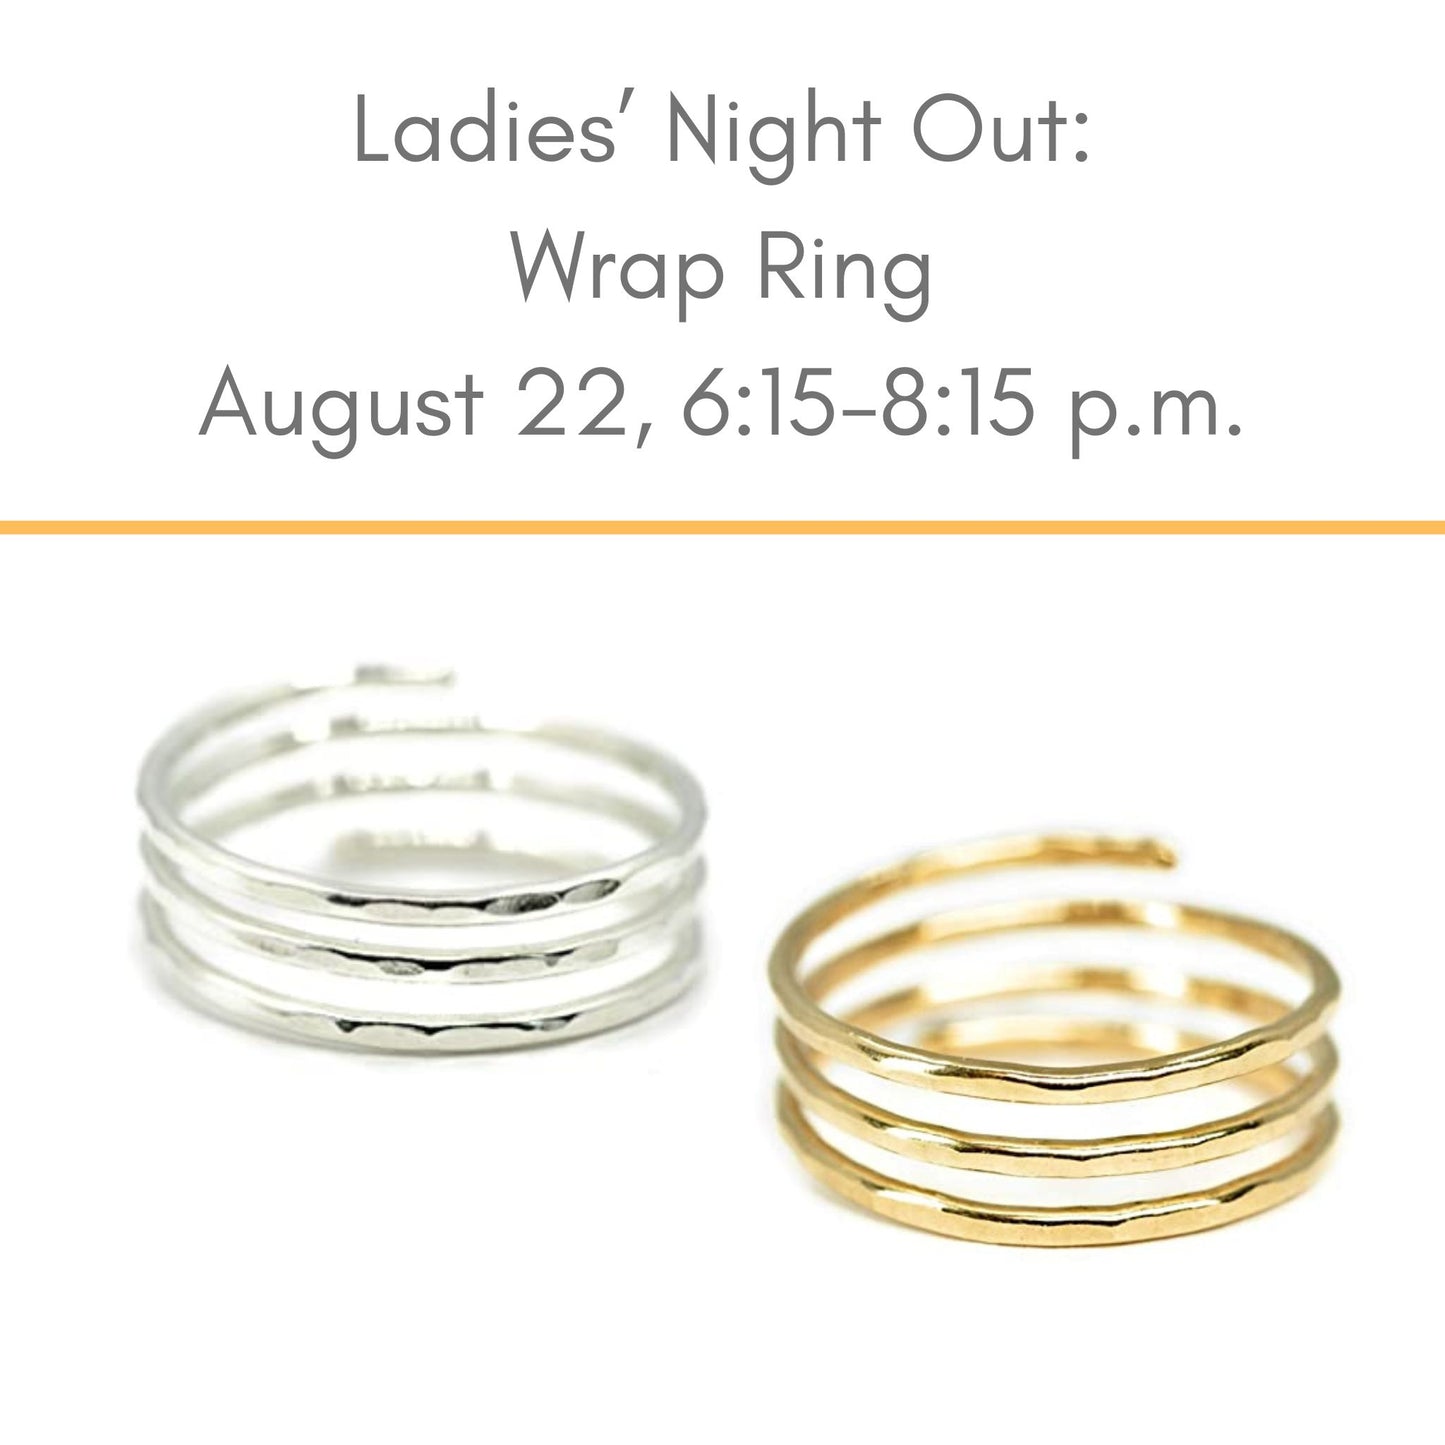 Ladies' Night Out: Wrap Ring - August 22